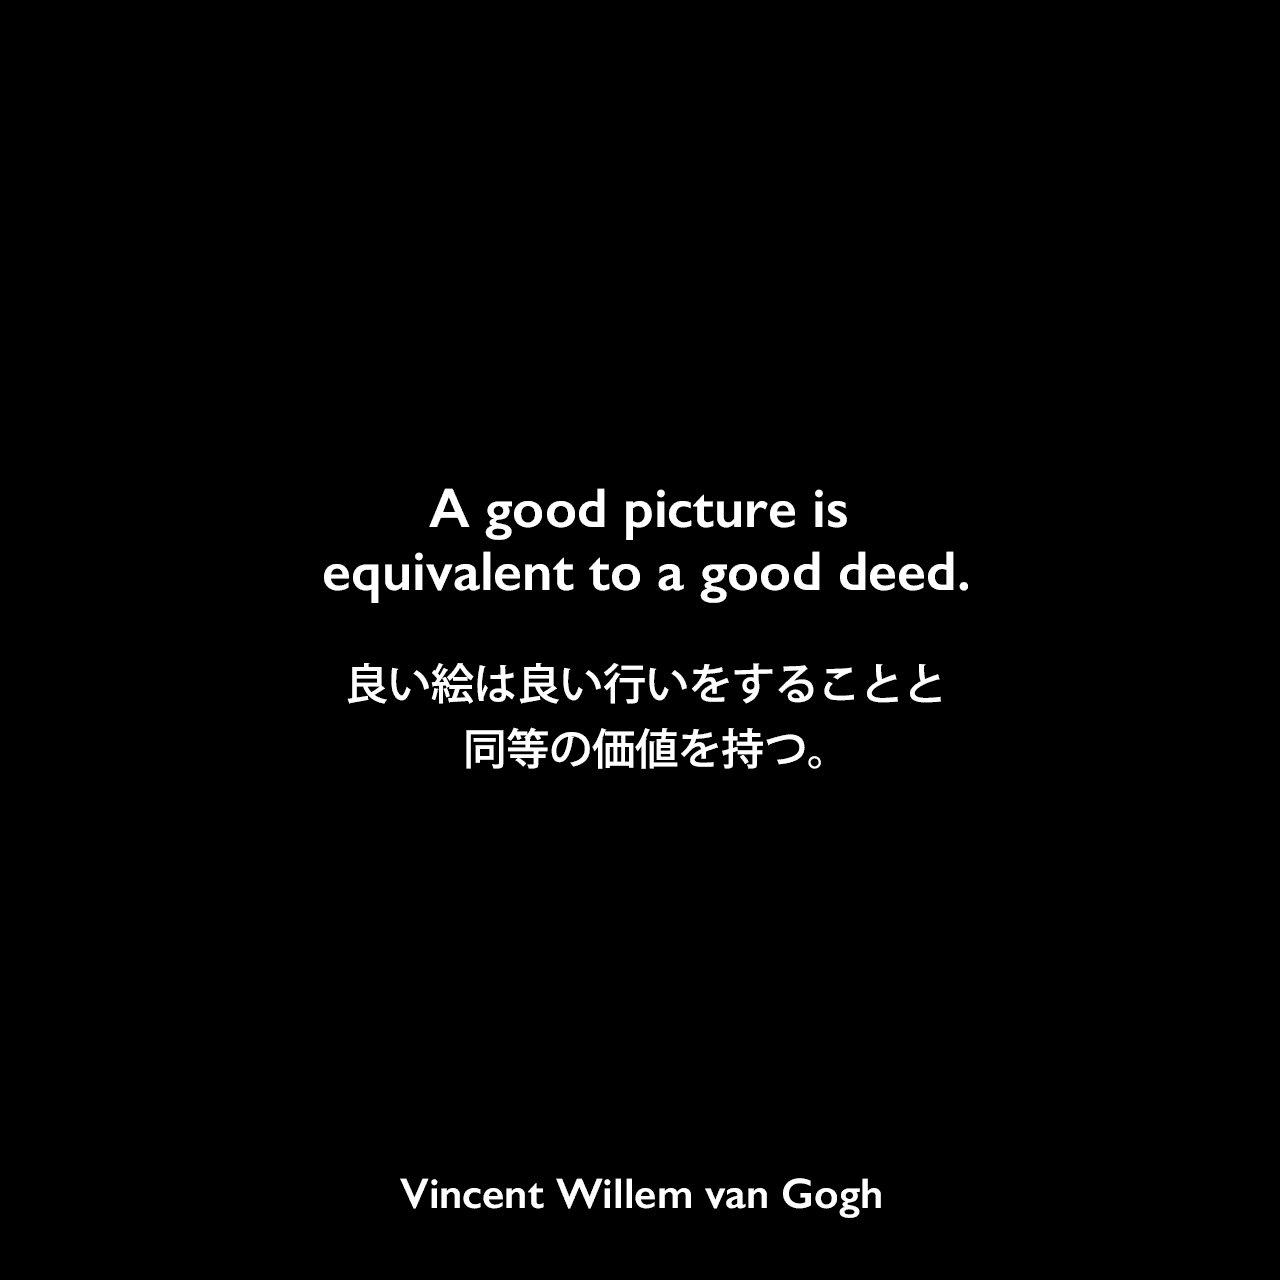 A good picture is equivalent to a good deed.良い絵は良い行いをすることと同等の価値を持つ。Vincent Willem van Gogh